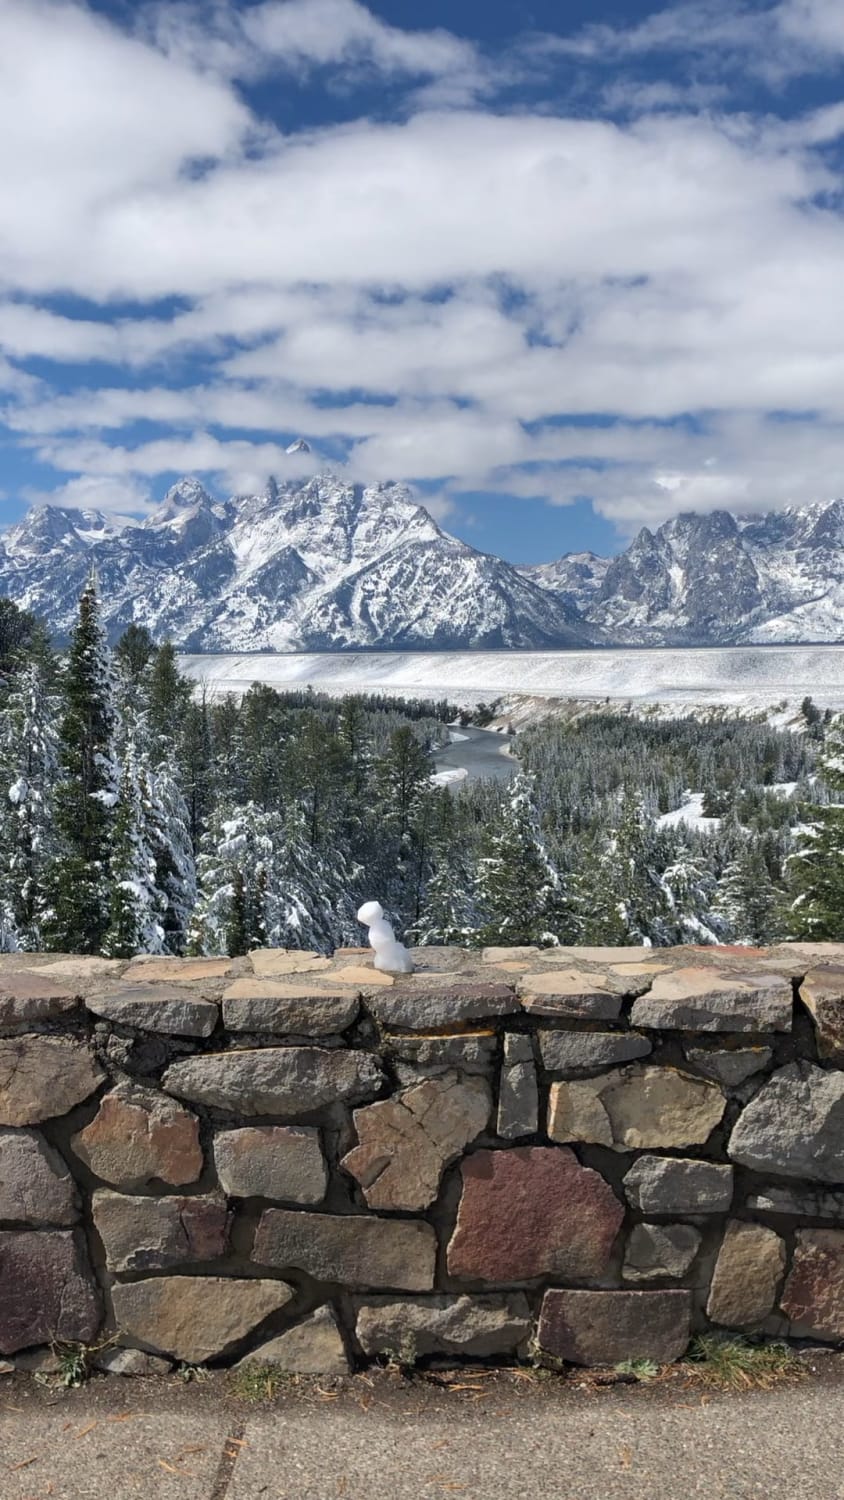 Grand Tetons and snake river after a light snow the night before